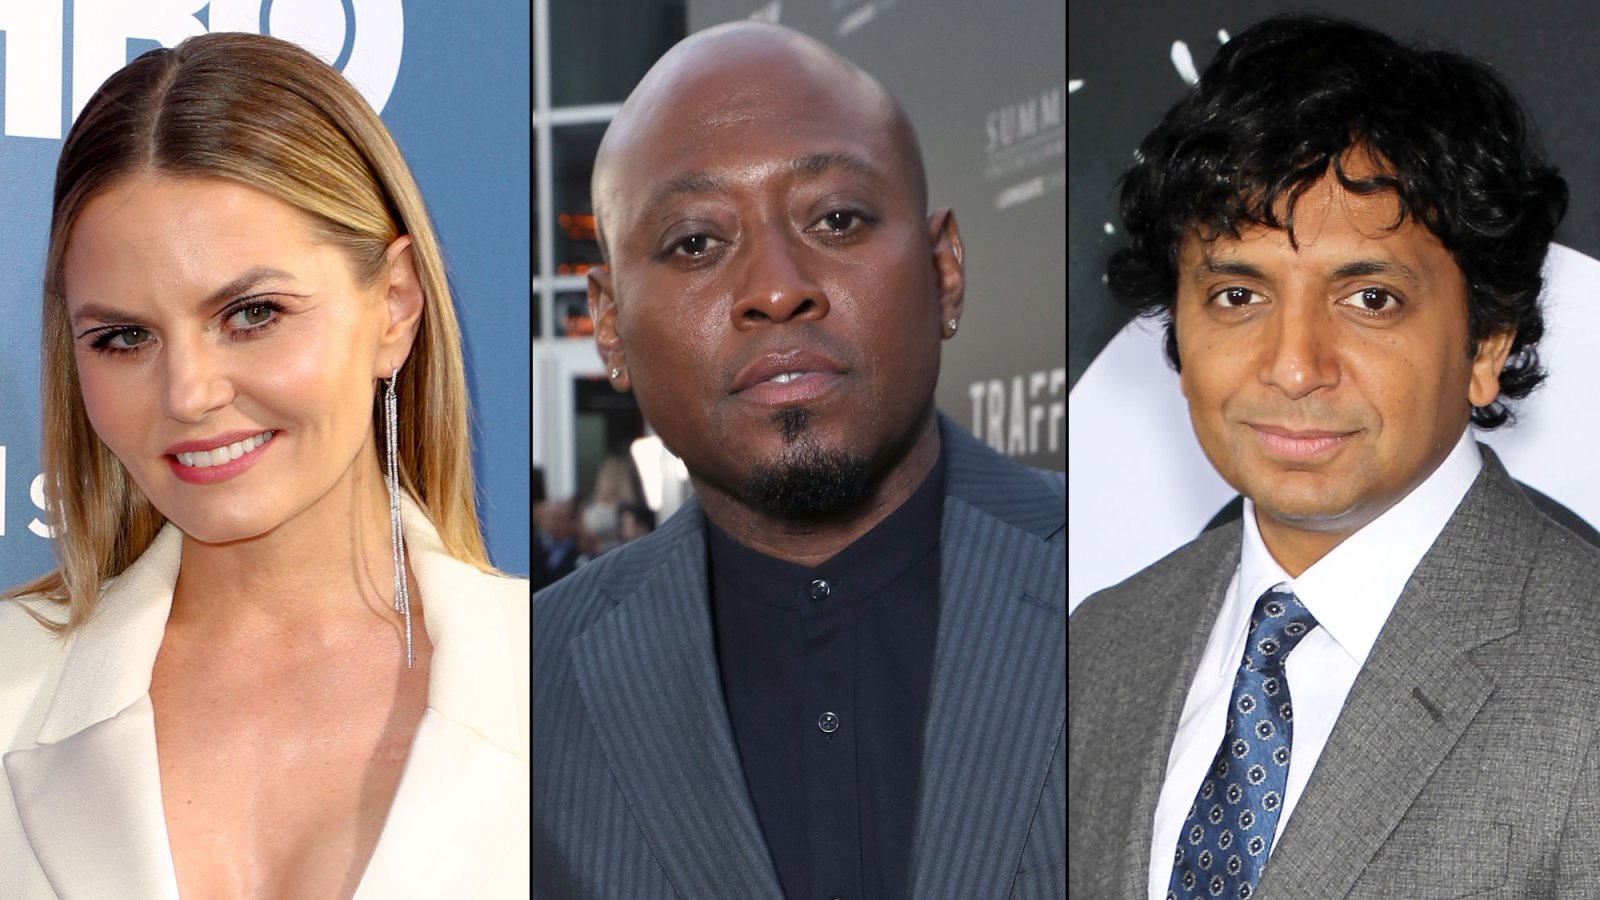 Jennifer Morrison, Omar Epps, M. Night Shyamalan and 7 Others Join 'This Is Us' Season 4 in Mystery Roles